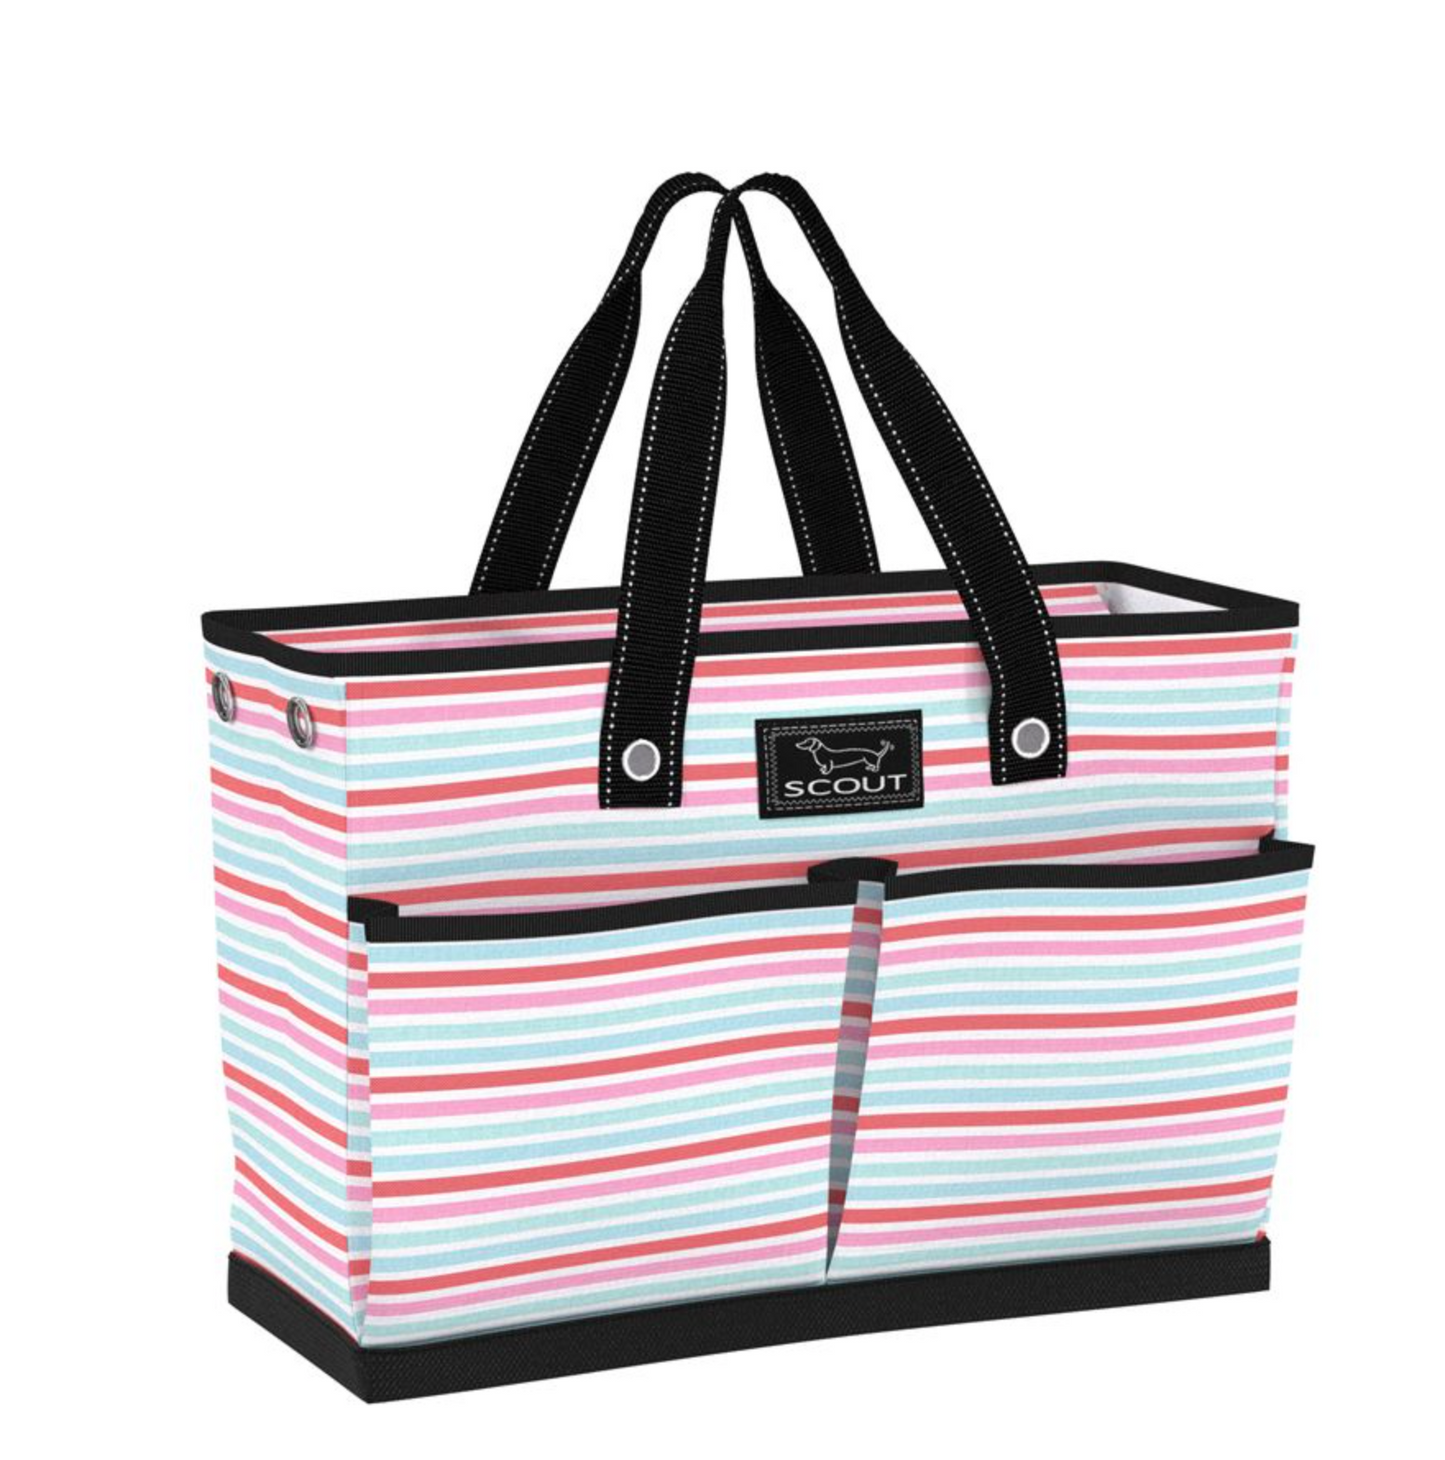 Load image into Gallery viewer, This bag is well-suited for multiple uses with four exterior pockets, a roomy interior, and a max-capacity breakaway zipper. Not your usual fabric, this unique material is durable, lightweight, and keeps things dry for whatever your day throws at you.
